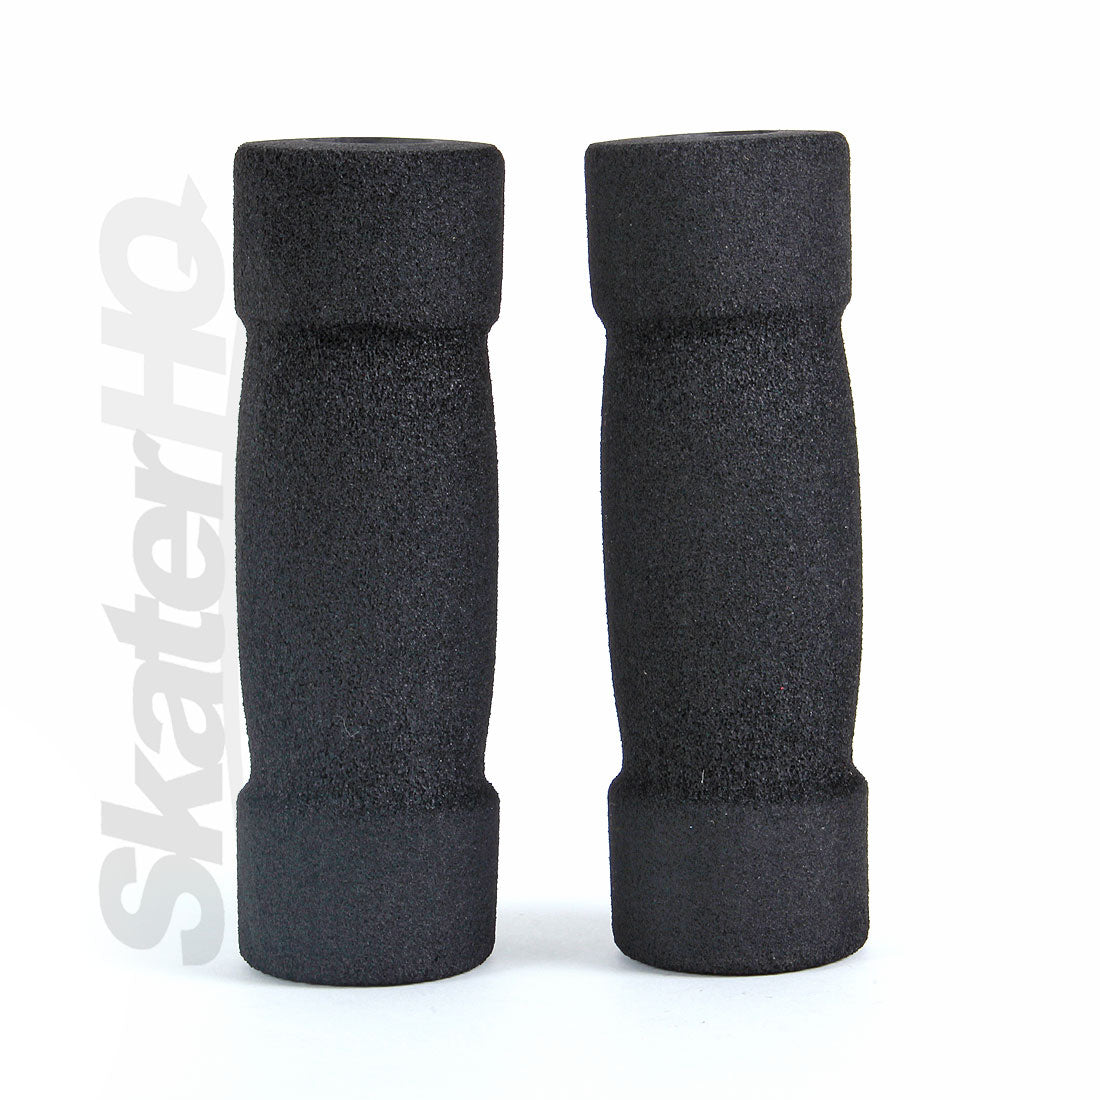 Micro Scooter Foam Handle Grips - Black Scooter Grips